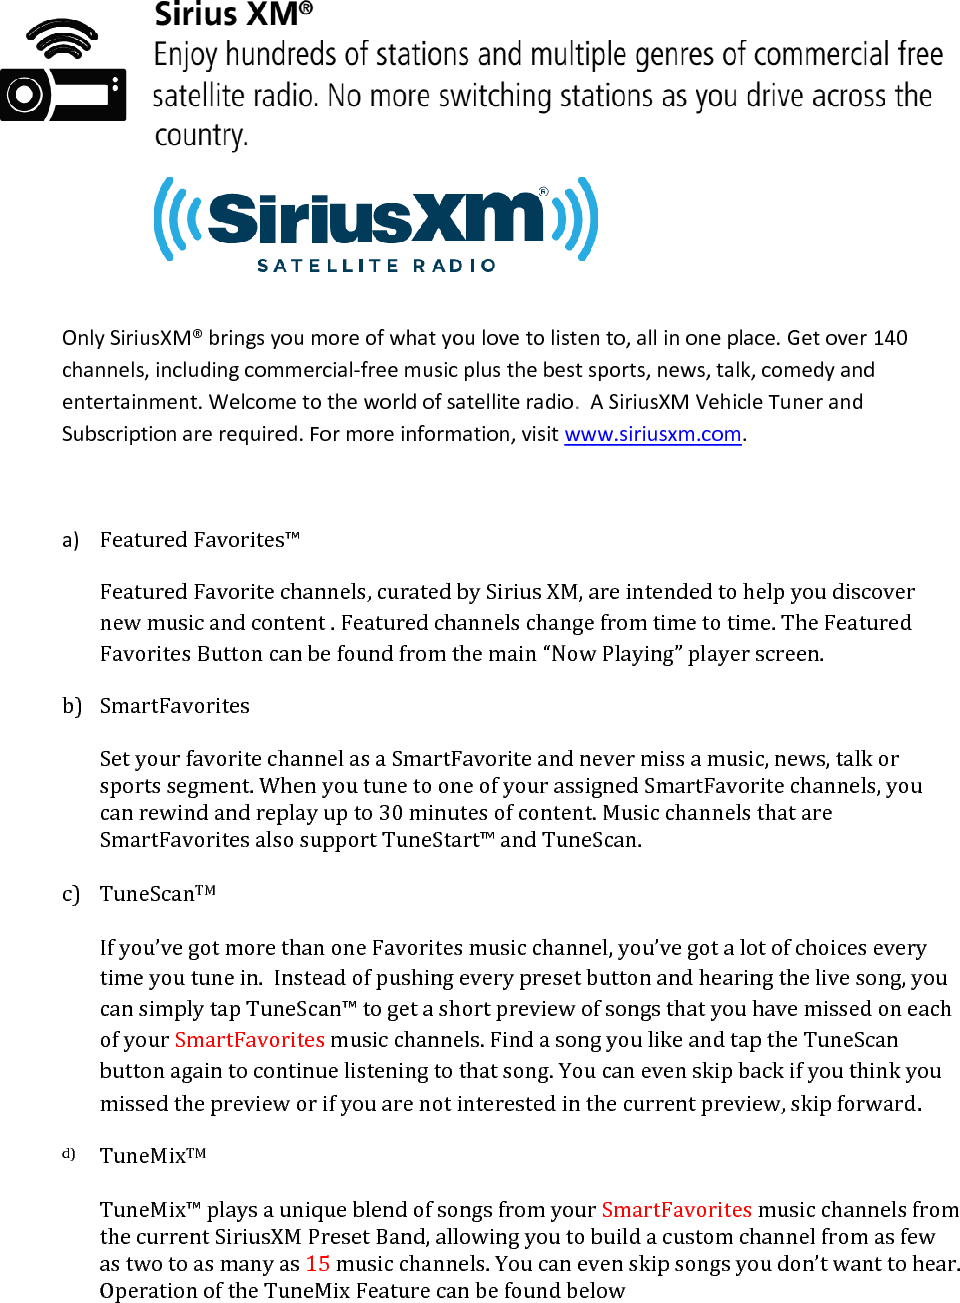  Only SiriusXM® brings you more of what you love to listen to, all in one place. Get over 140 channels, including commercial-free music plus the best sports, news, talk, comedy and entertainment. Welcome to the world of satellite radio.  A SiriusXM Vehicle Tuner and Subscription are required. For more information, visit www.siriusxm.com.  a) Featured Favorites™ Featured Favorite channels, curated by Sirius XM, are intended to help you discover new music and content . Featured channels change from time to time. The Featured Favorites Button can be found from the main “Now Playing” player screen.   b) SmartFavorites  Set your favorite channel as a SmartFavorite and never miss a music, news, talk or sports segment. When you tune to one of your assigned SmartFavorite channels, you can rewind and replay up to 30 minutes of content. Music channels that are SmartFavorites also support TuneStart™ and TuneScan.  c) TuneScanTM  If you’ve got more than one Favorites music channel, you’ve got a lot of choices every time you tune in.  Instead of pushing every preset button and hearing the live song, you can simply tap TuneScan™ to get a short preview of songs that you have missed on each of your SmartFavorites music channels. Find a song you like and tap the TuneScan button again to continue listening to that song. You can even skip back if you think you missed the preview or if you are not interested in the current preview, skip forward. d) TuneMixTM  TuneMix™ plays a unique blend of songs from your SmartFavorites music channels from the current SiriusXM Preset Band, allowing you to build a custom channel from as few as two to as many as 15 music channels. You can even skip songs you don’t want to hear. Operation of the TuneMix Feature can be found below  